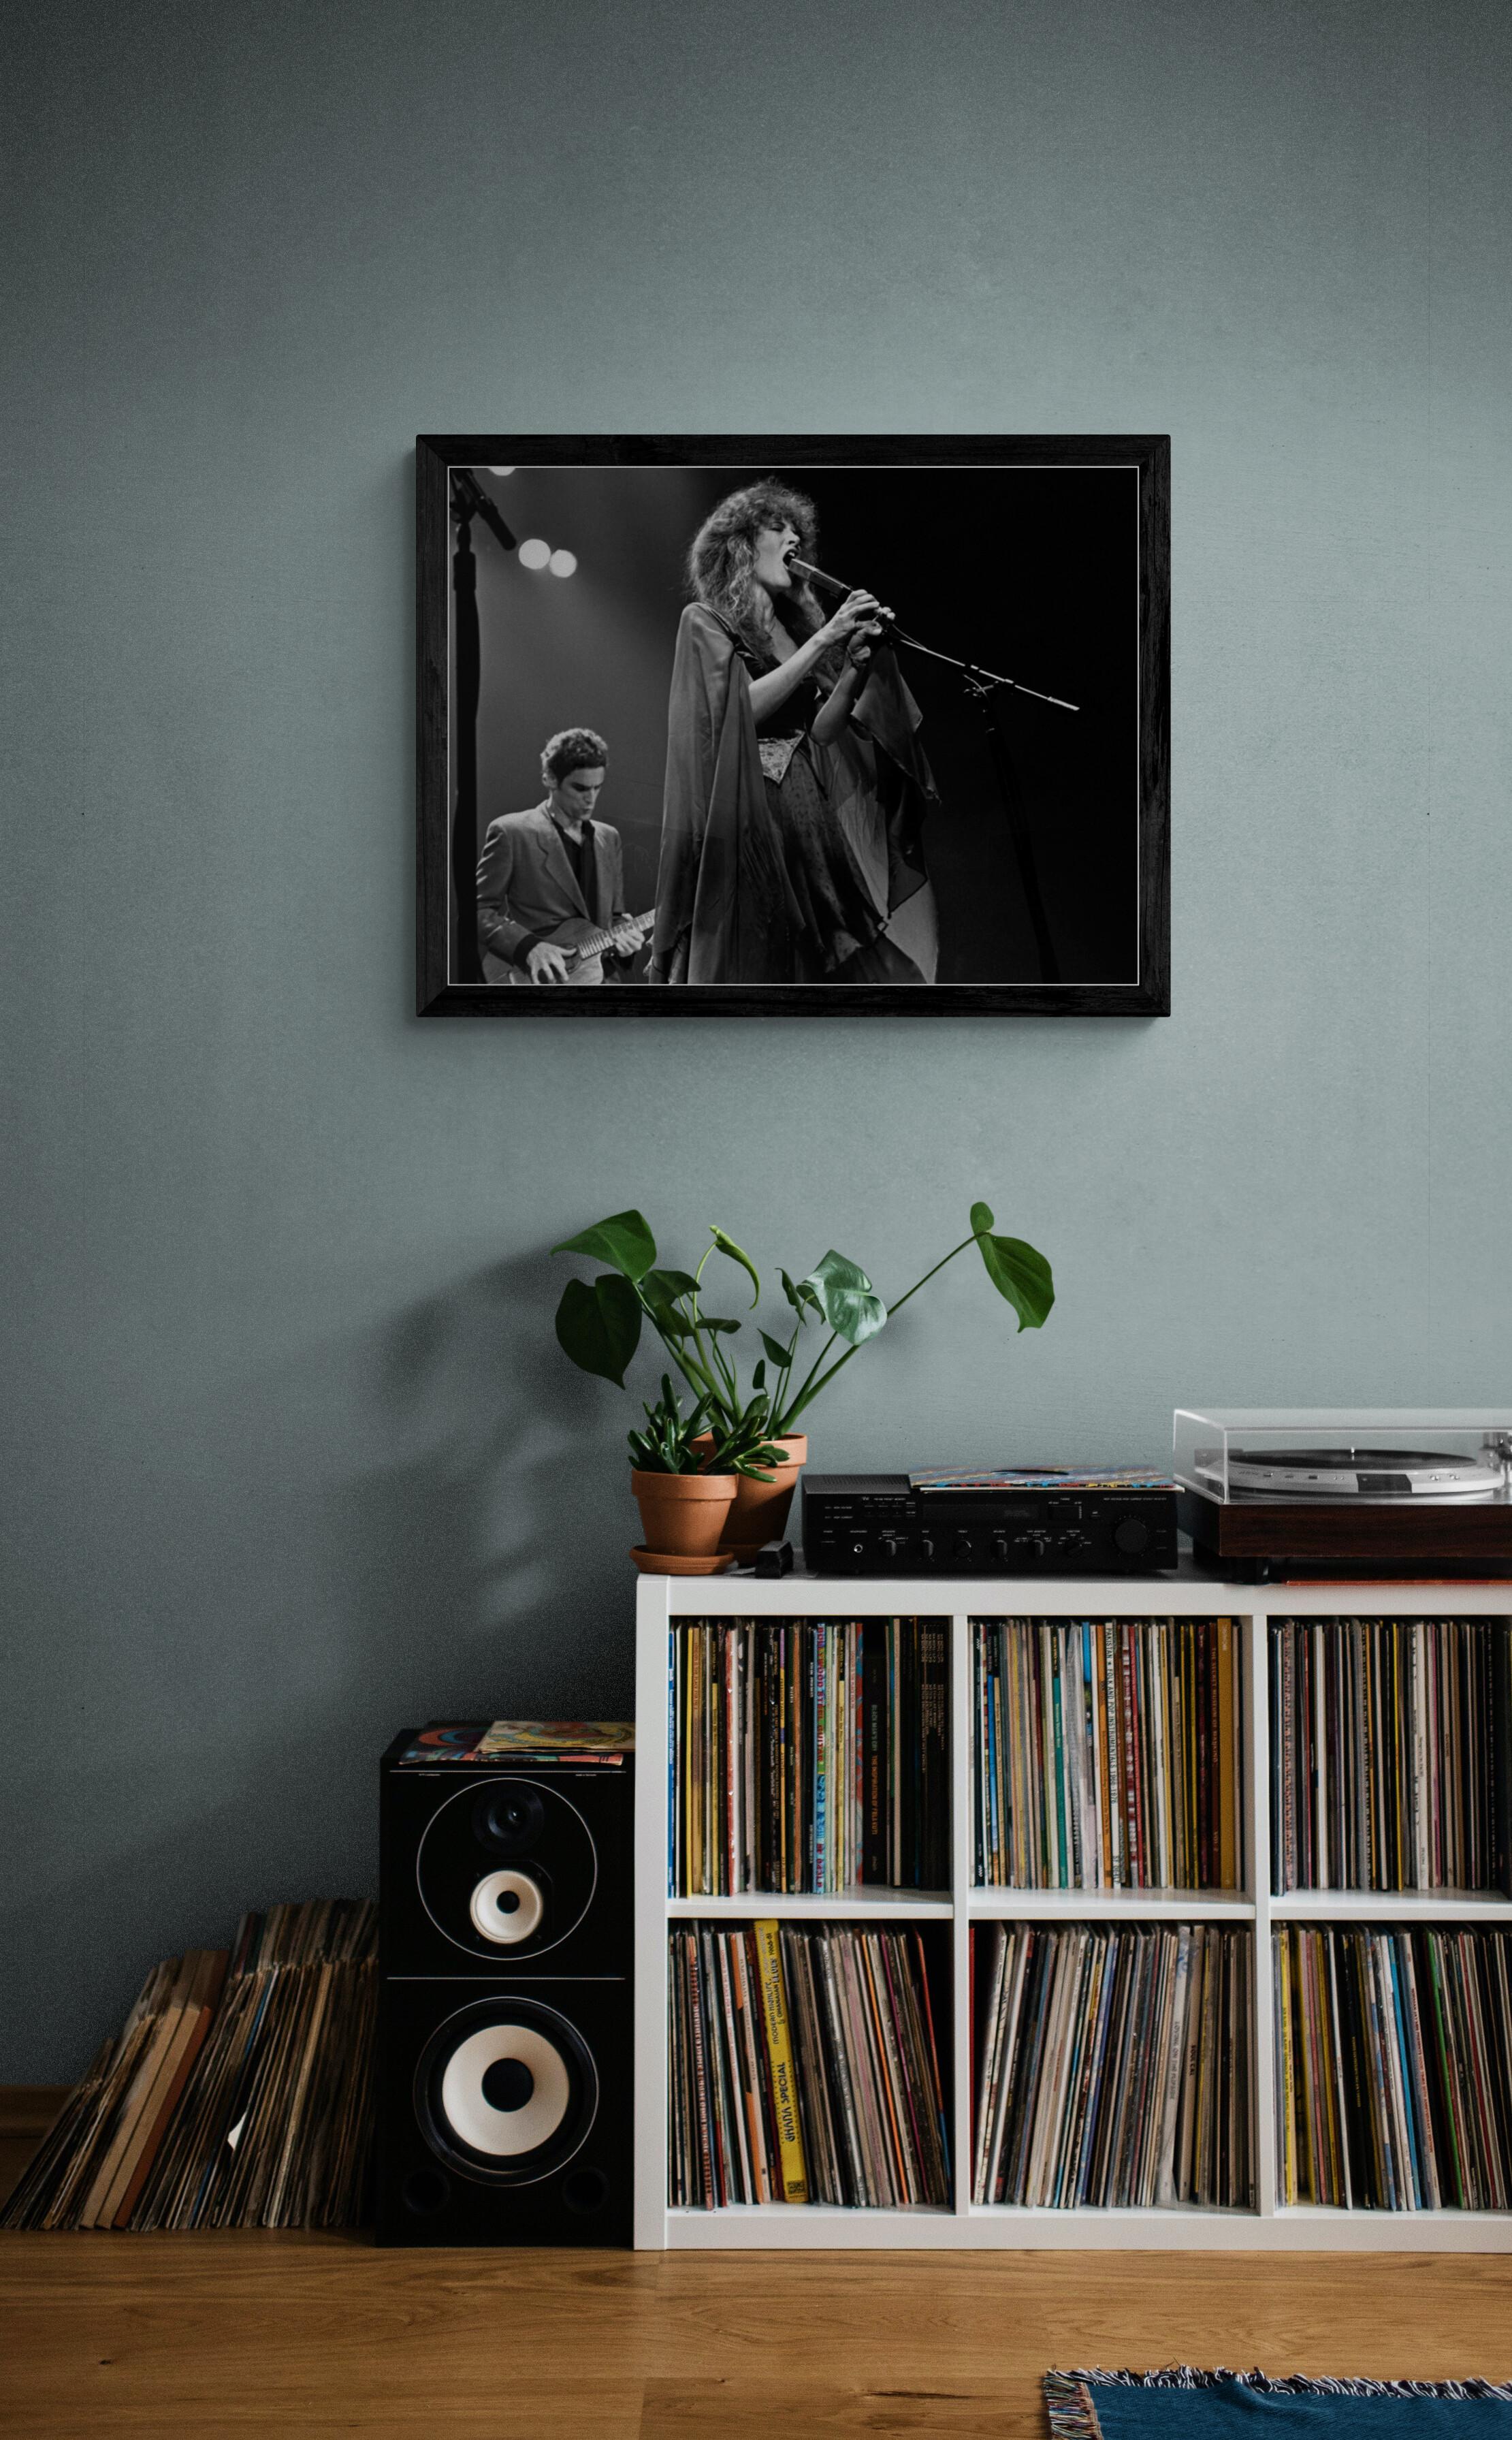 Title: Stevie Nicks #6
Artist: Richard E. Aaron
Estate Edition: Hand numbered with estate chop mark in the margin, signature stamp on verso, archival pigment print on Hahnemühle Photo Rag Pearl, 100% cotton paper fine art paper. Authorized worldwide